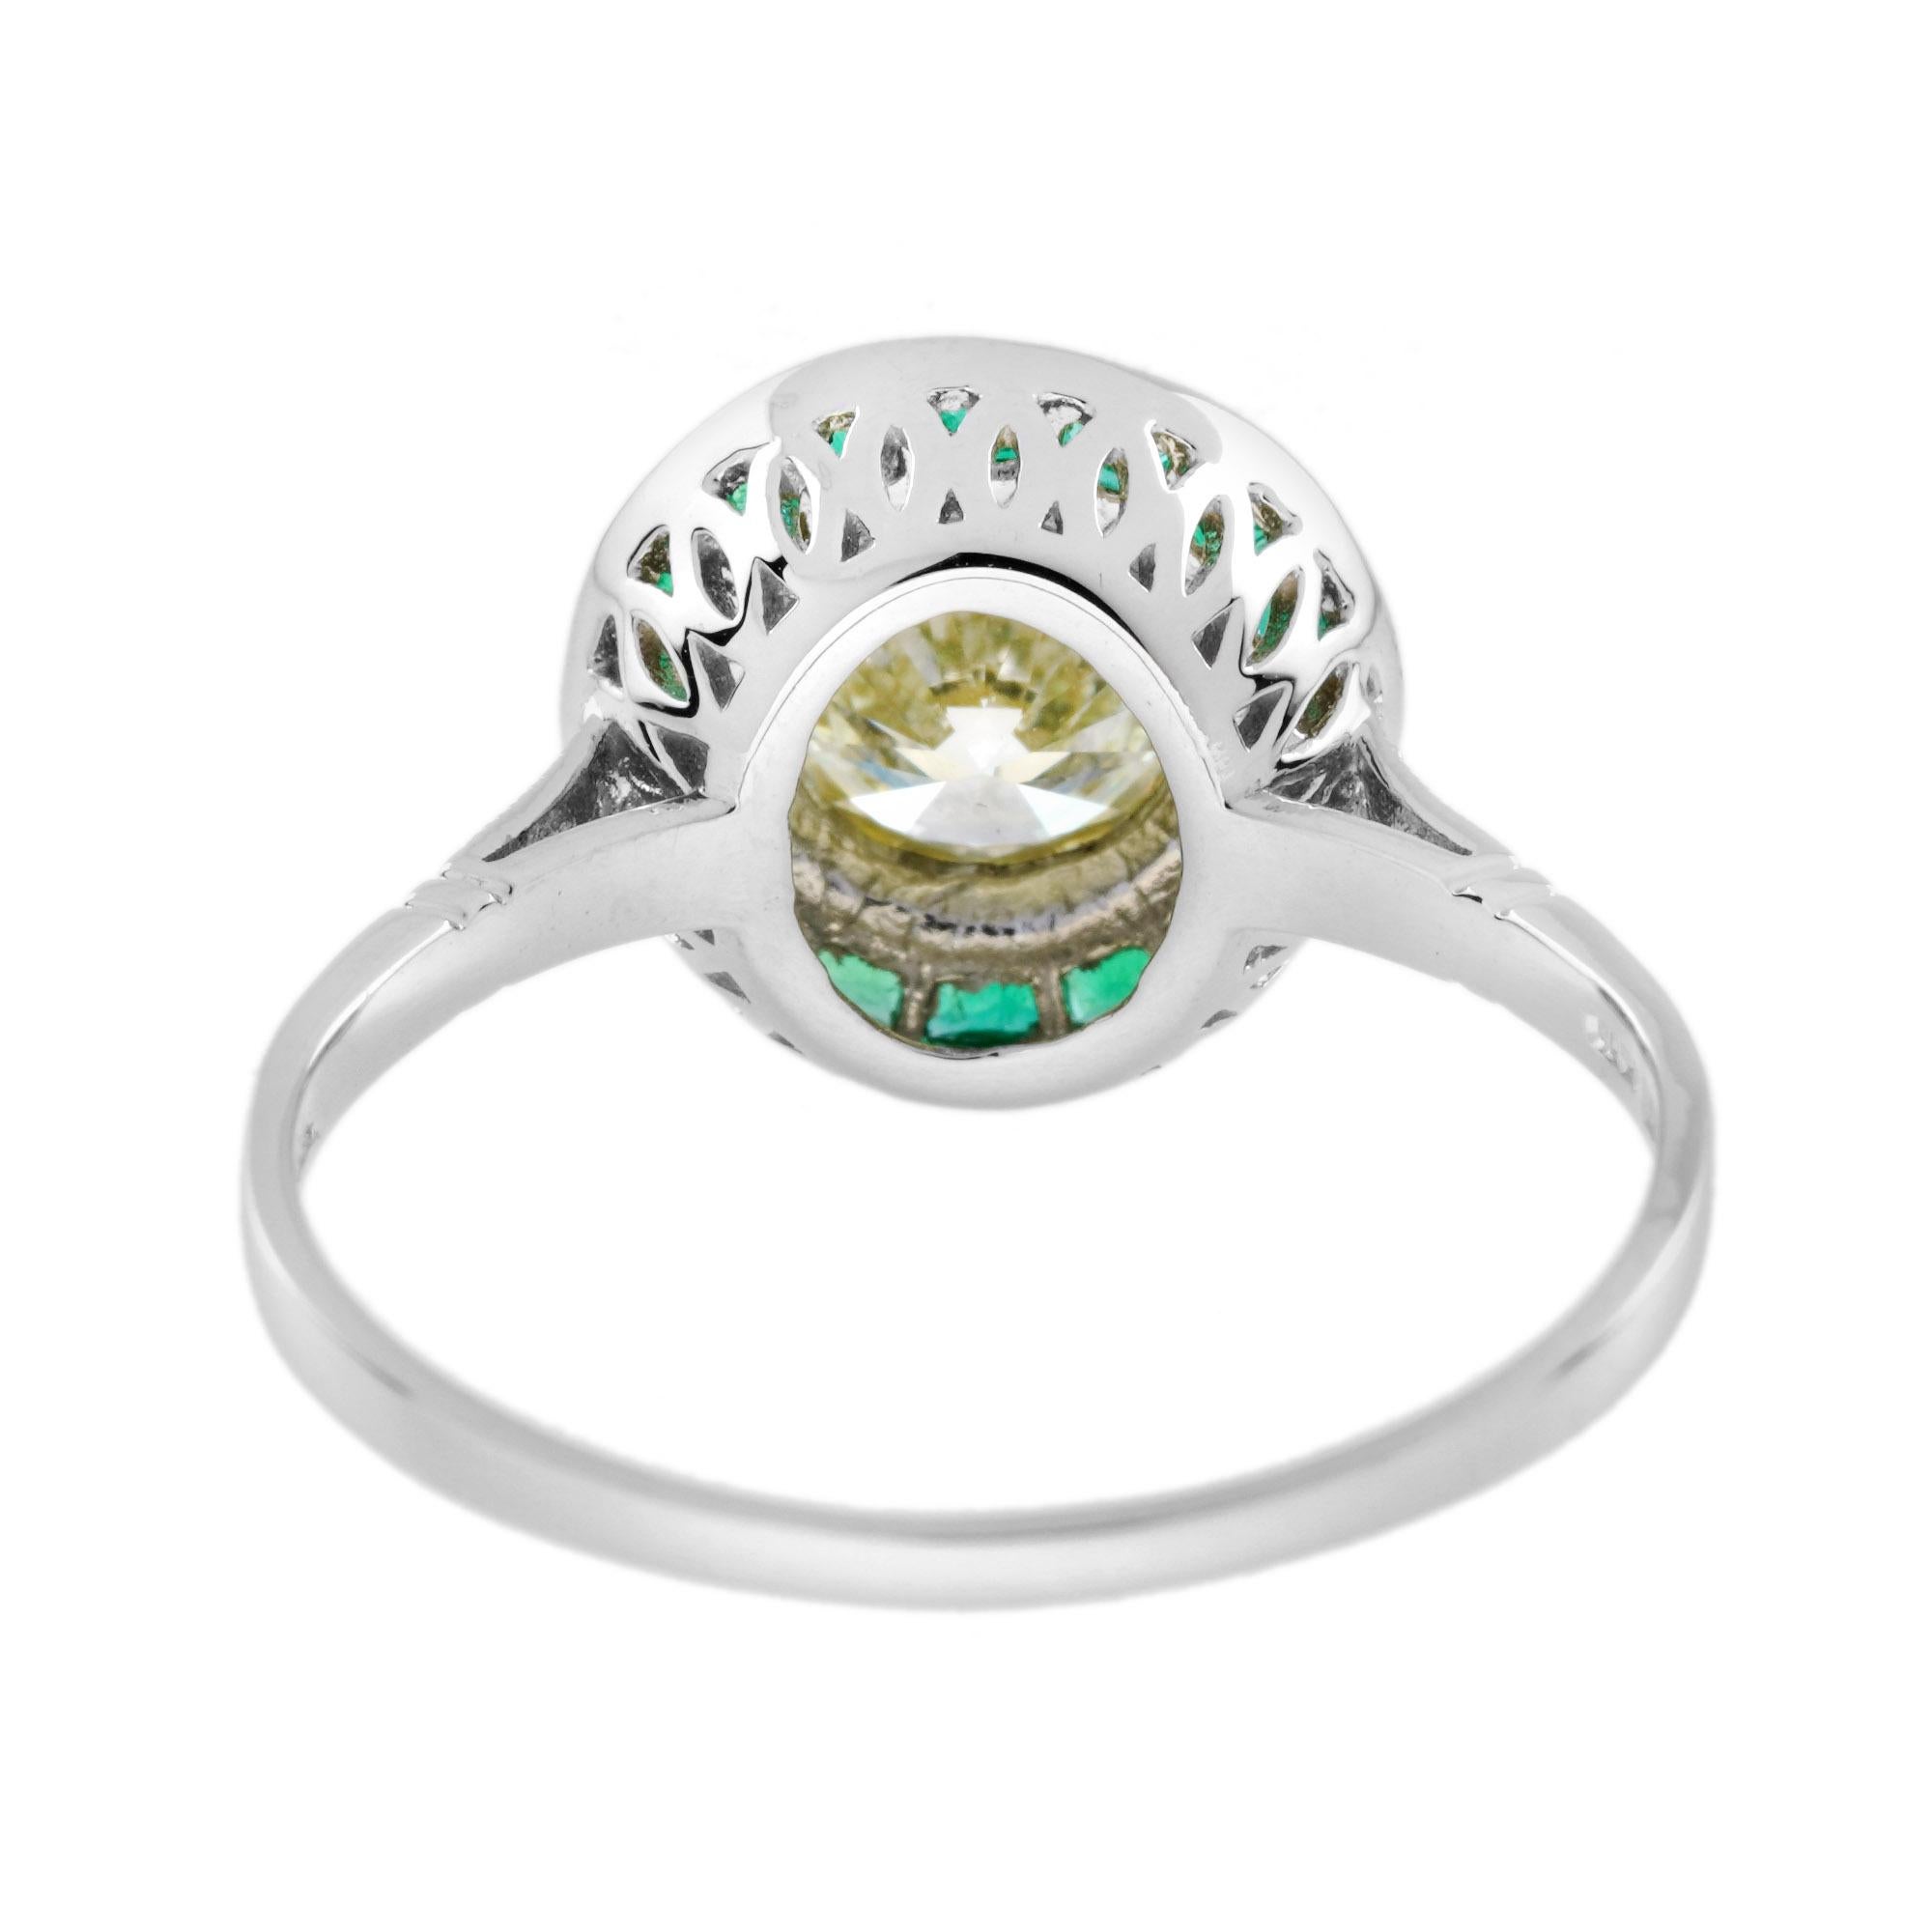 Certified 1 Ct. Diamond and Emerald Art Deco Style Target Ring in Platinum 950 In New Condition For Sale In Bangkok, TH